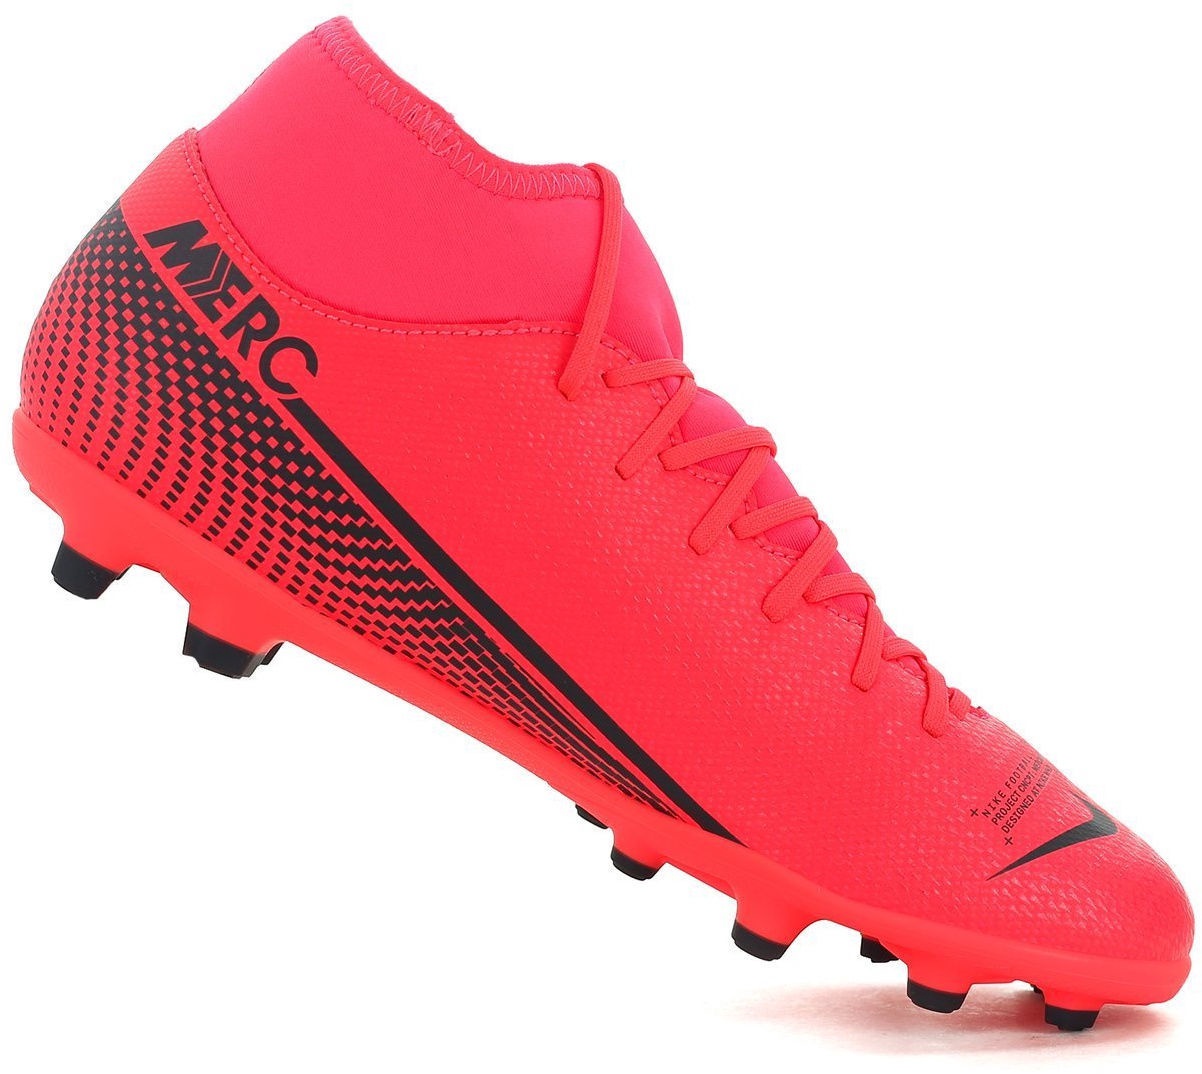 Nike Mercurial Superfly 7 Club TF M AT7980 010 football shoes